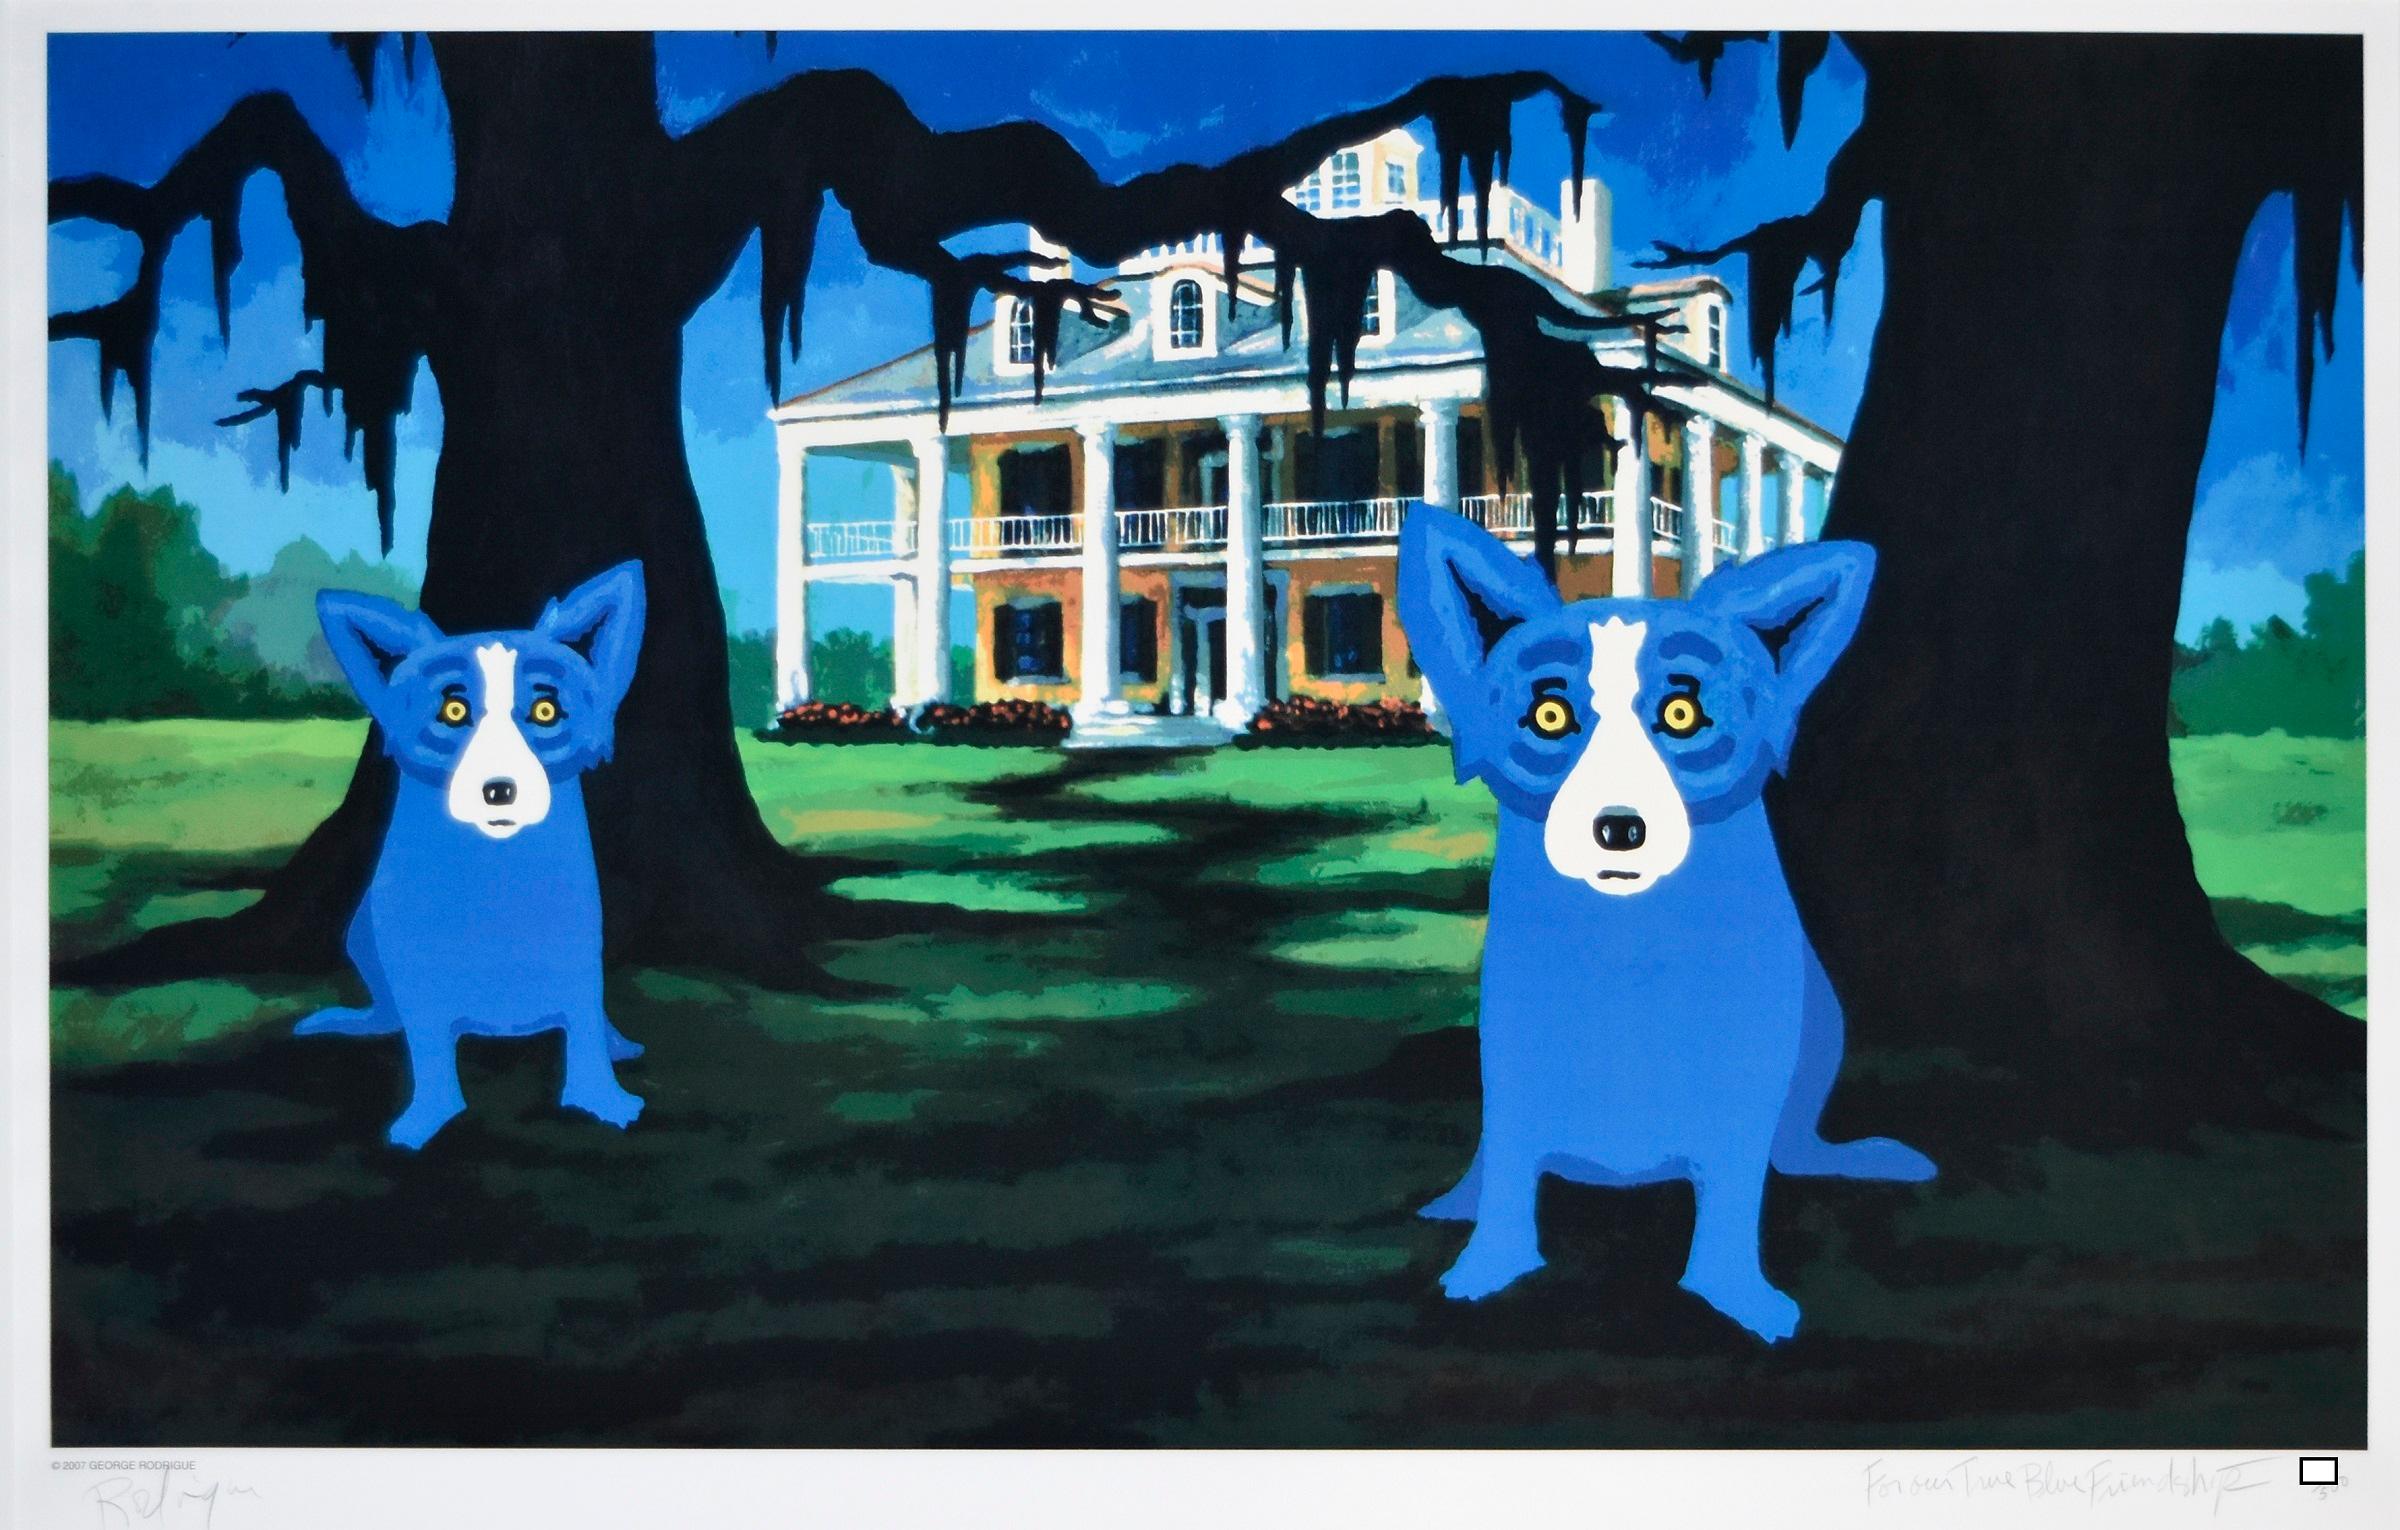 George Rodrigue Animal Print - Blue Dog "Rollin' on the River 2007"